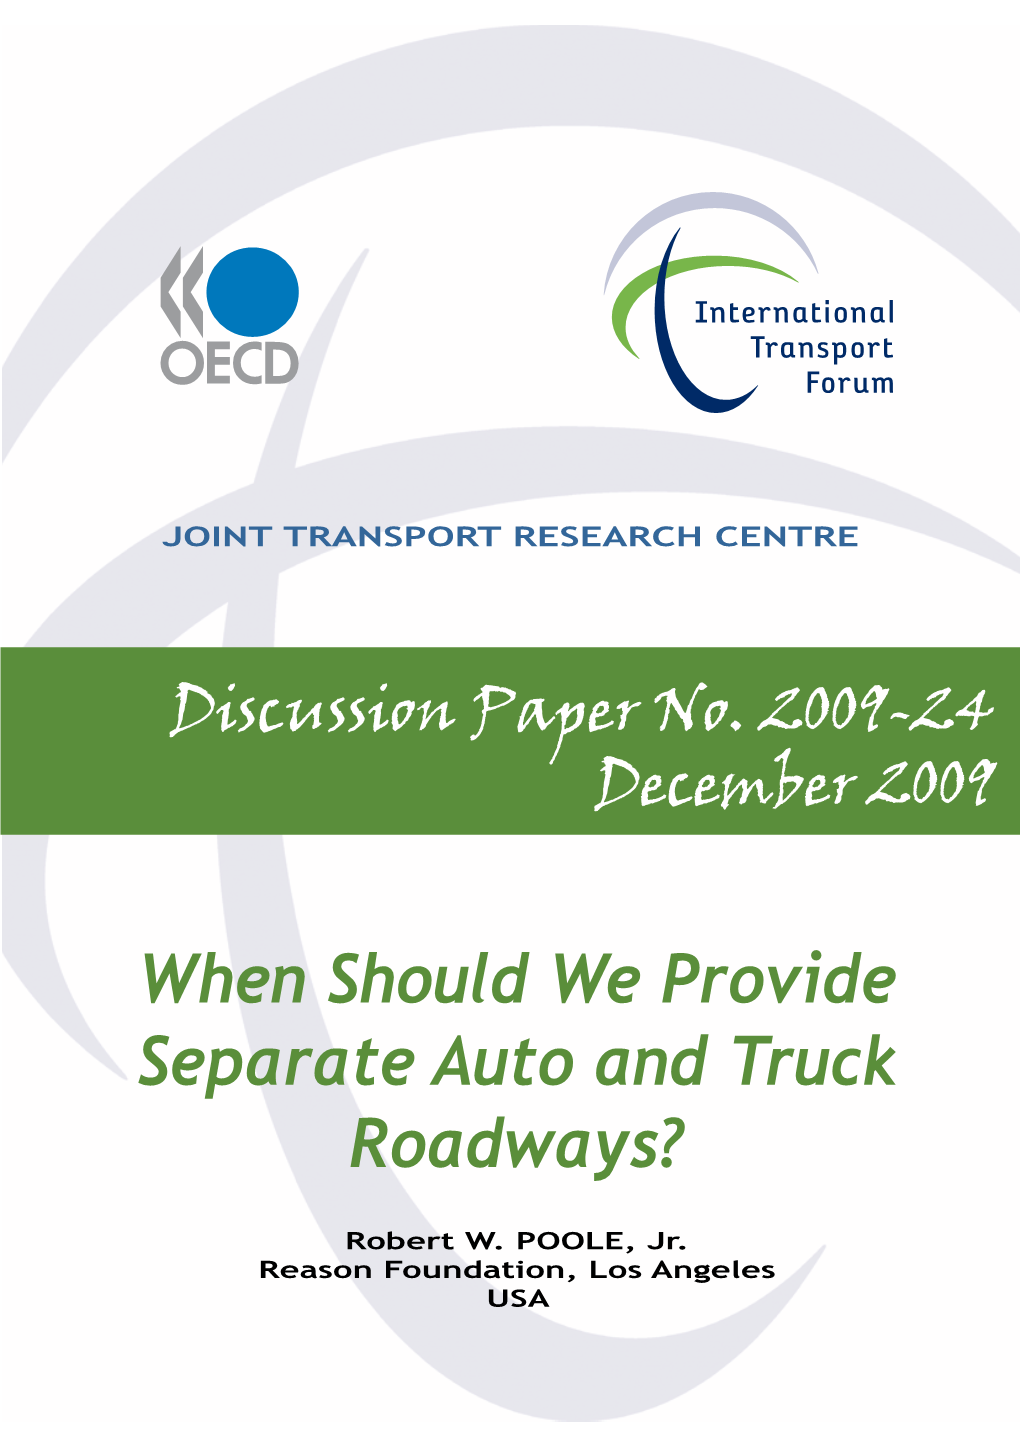 When Should We Provide Separate Auto and Truck Roadways?